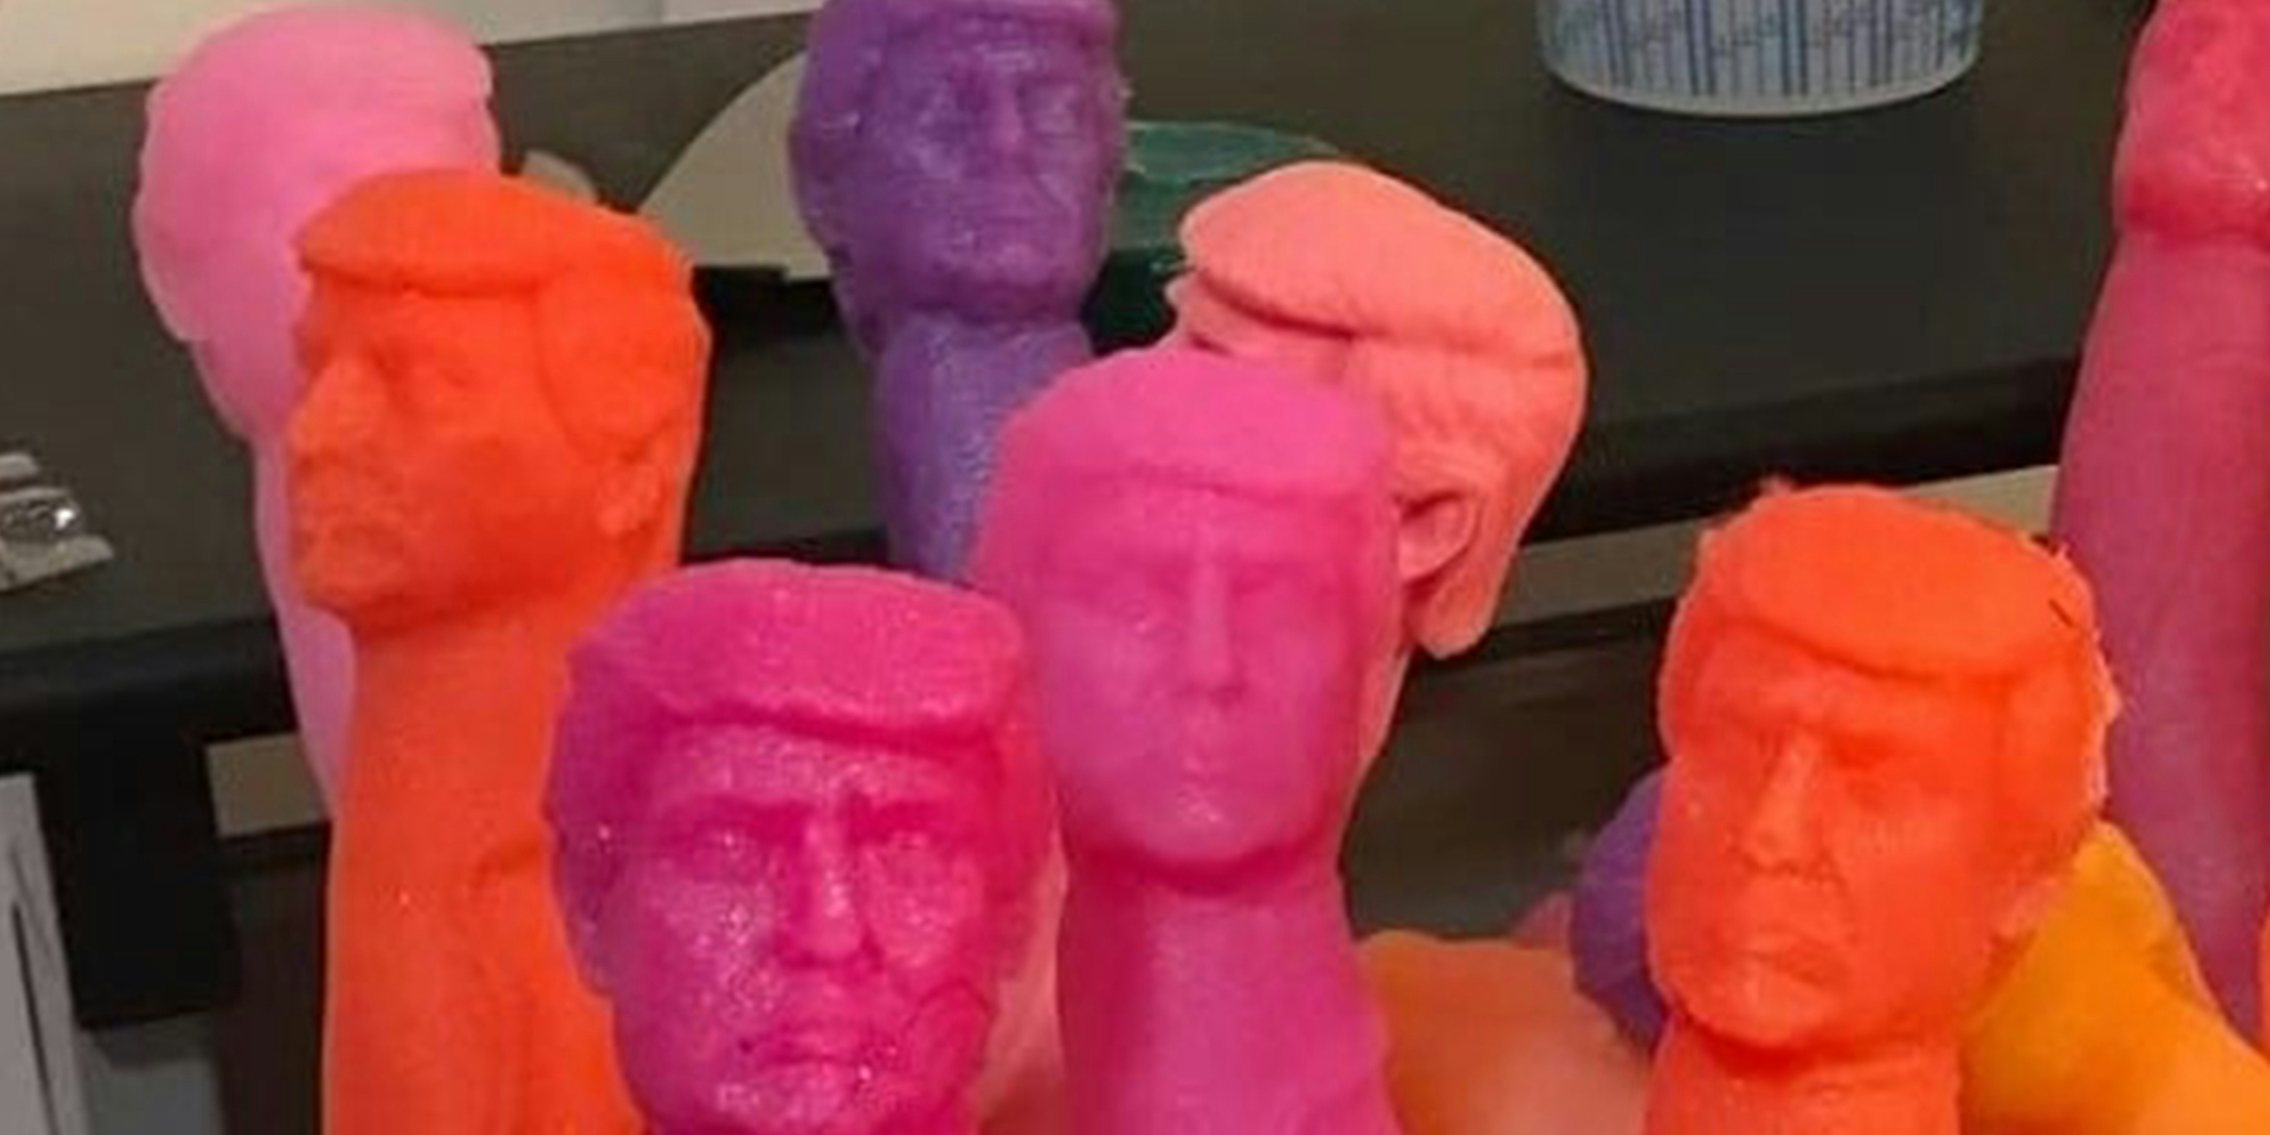 Plastic dongs with Donald Trump's head.